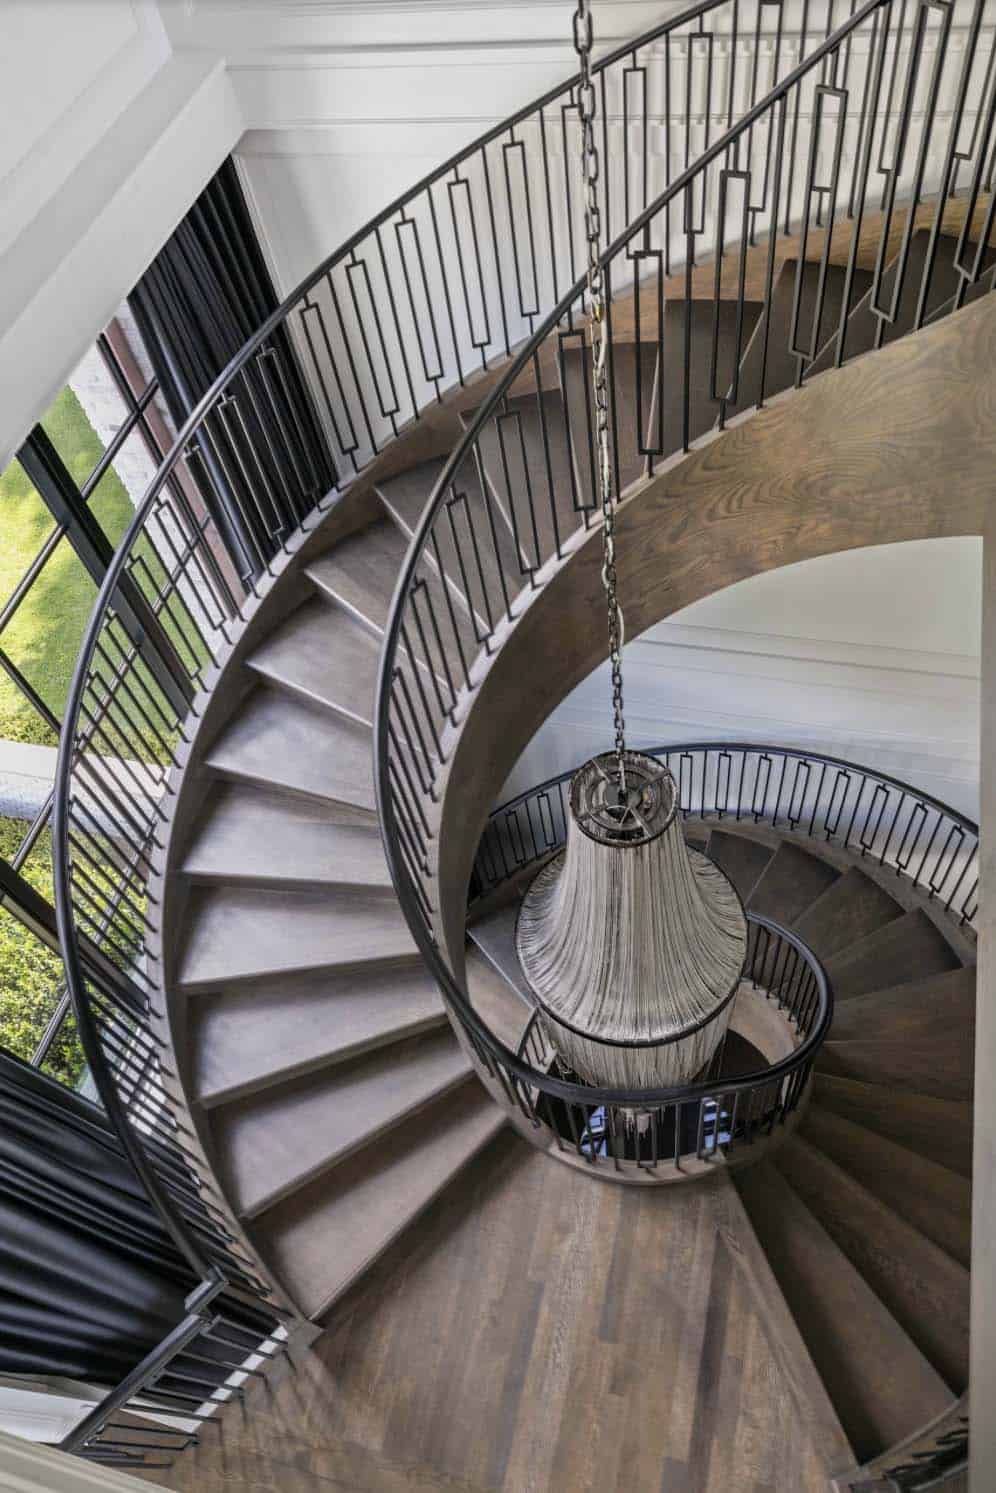 transitional style curved staircase